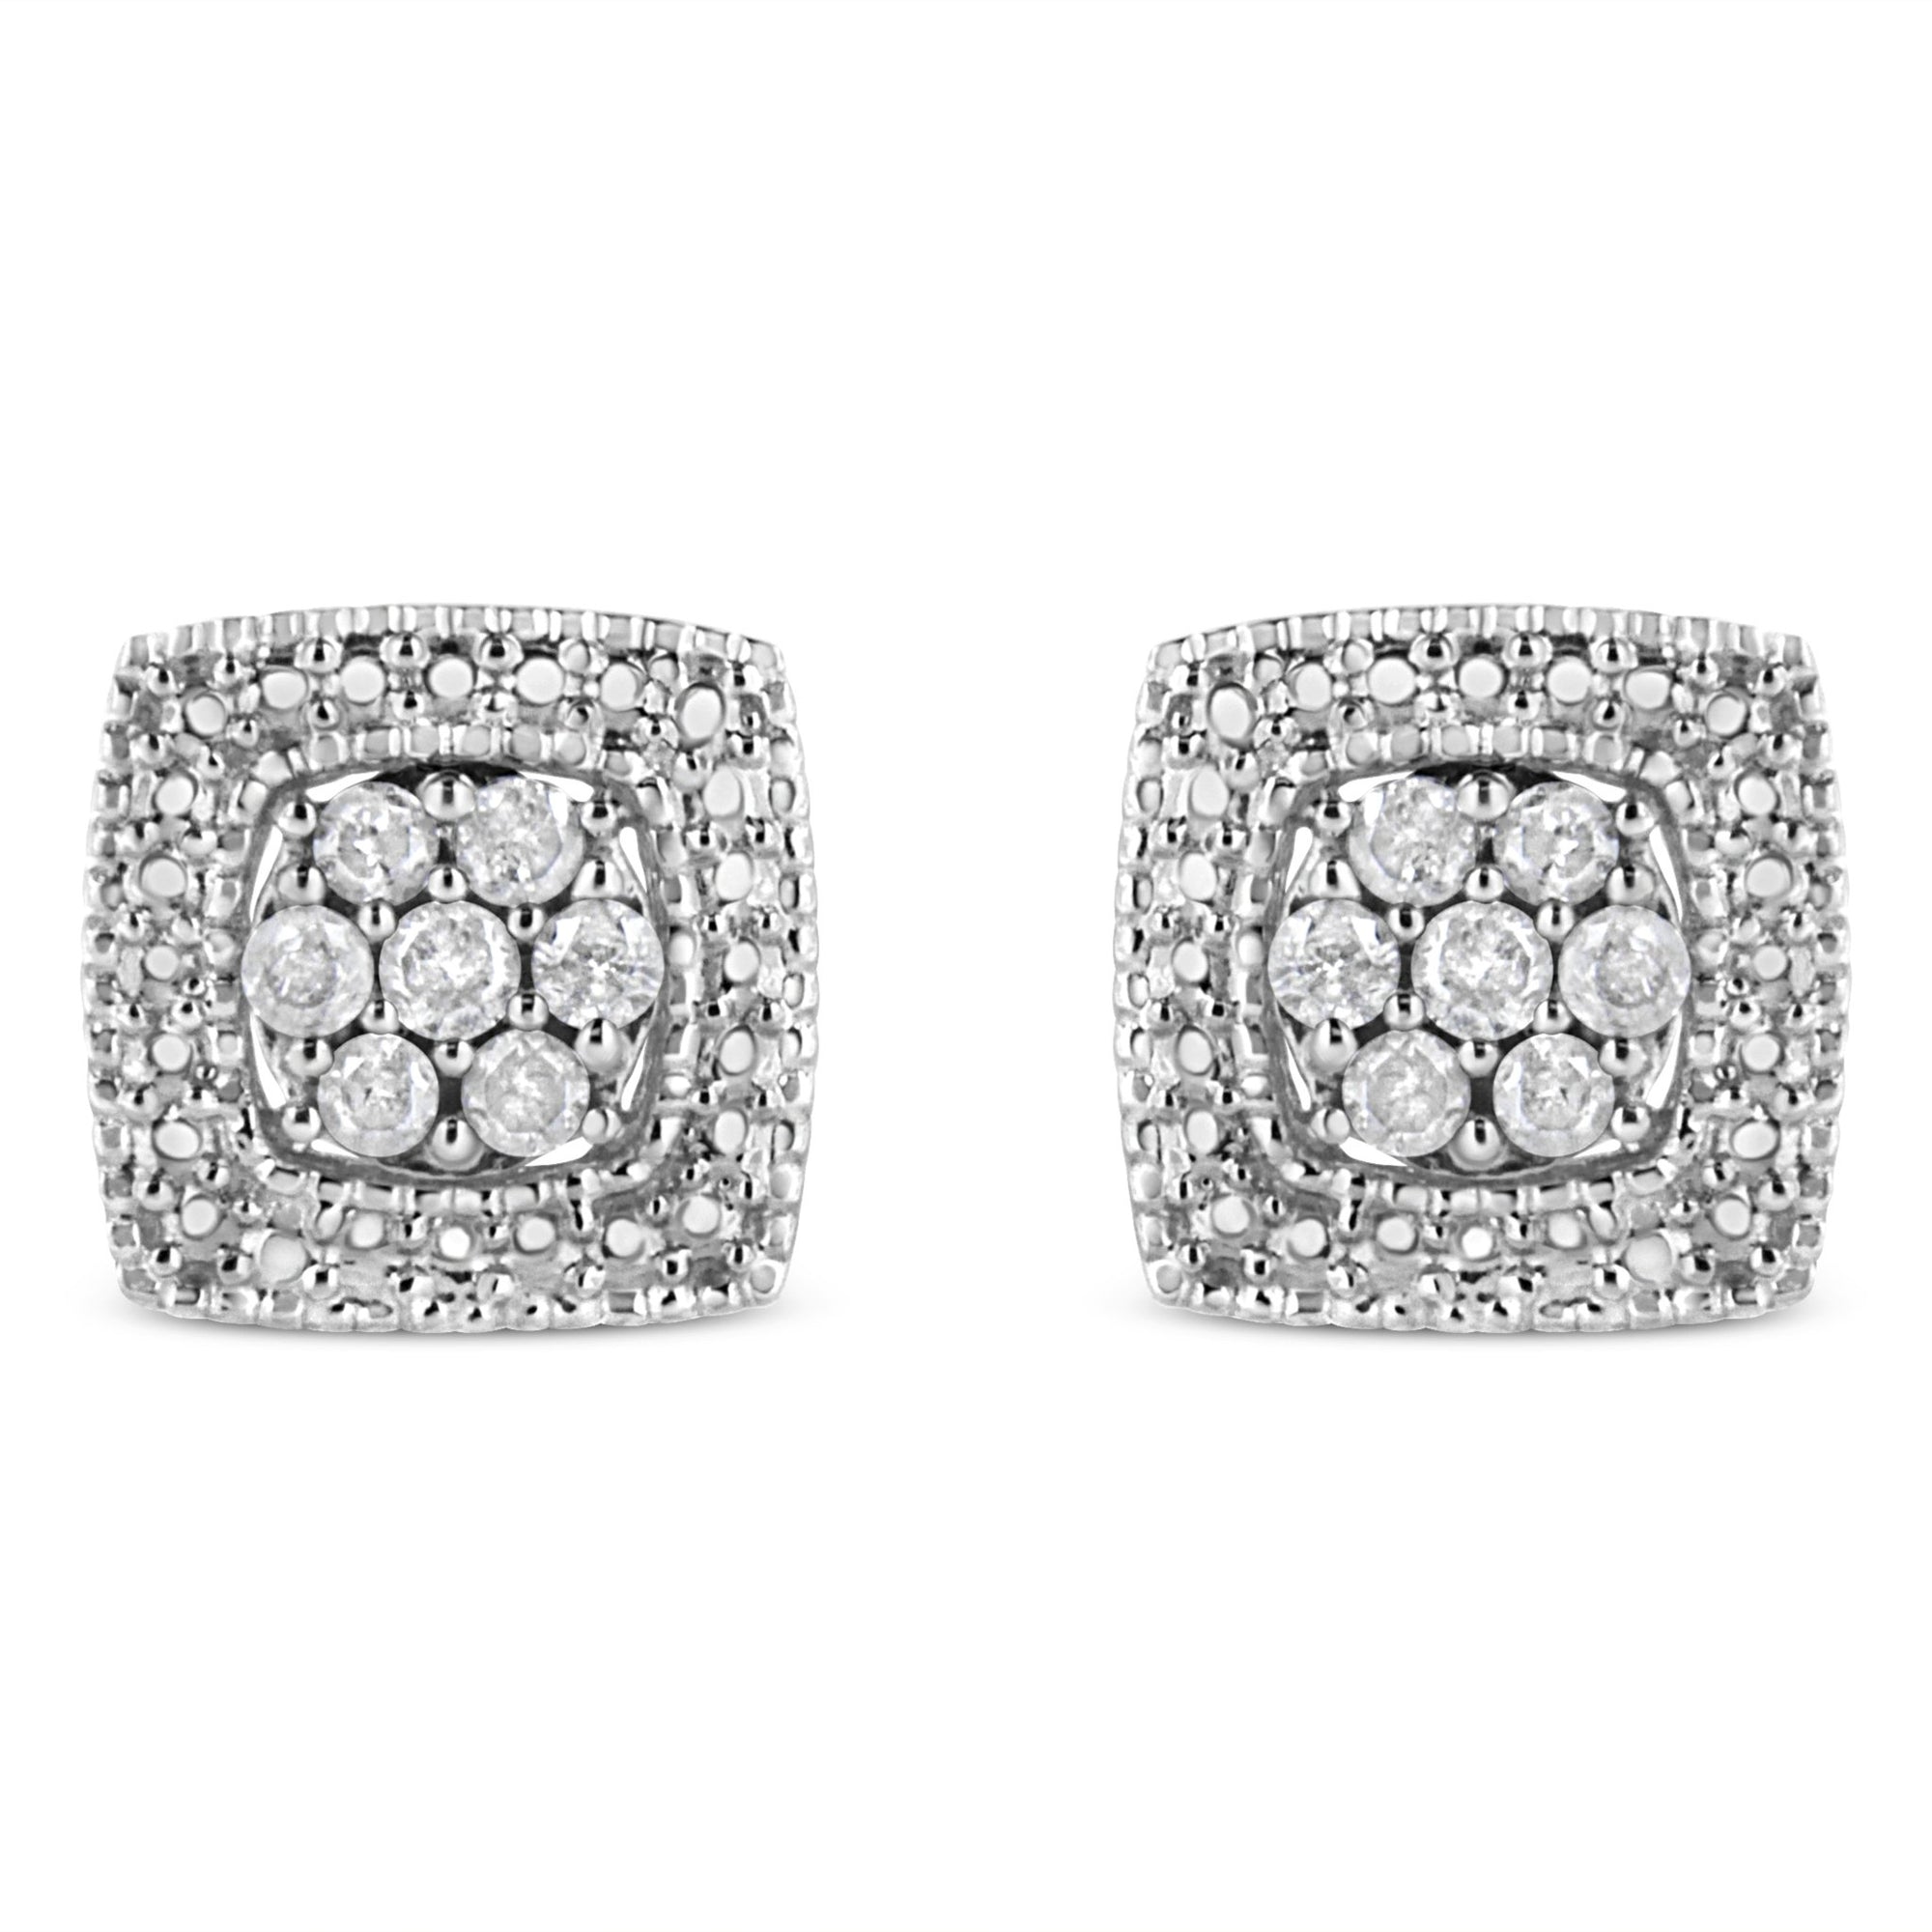 .925 Sterling Silver 1/2 Cttw Diamond Miligrain Square Shape Stud Earrings (I-J Color, I2-I3 Clarity) - LinkagejewelrydesignLinkagejewelrydesign